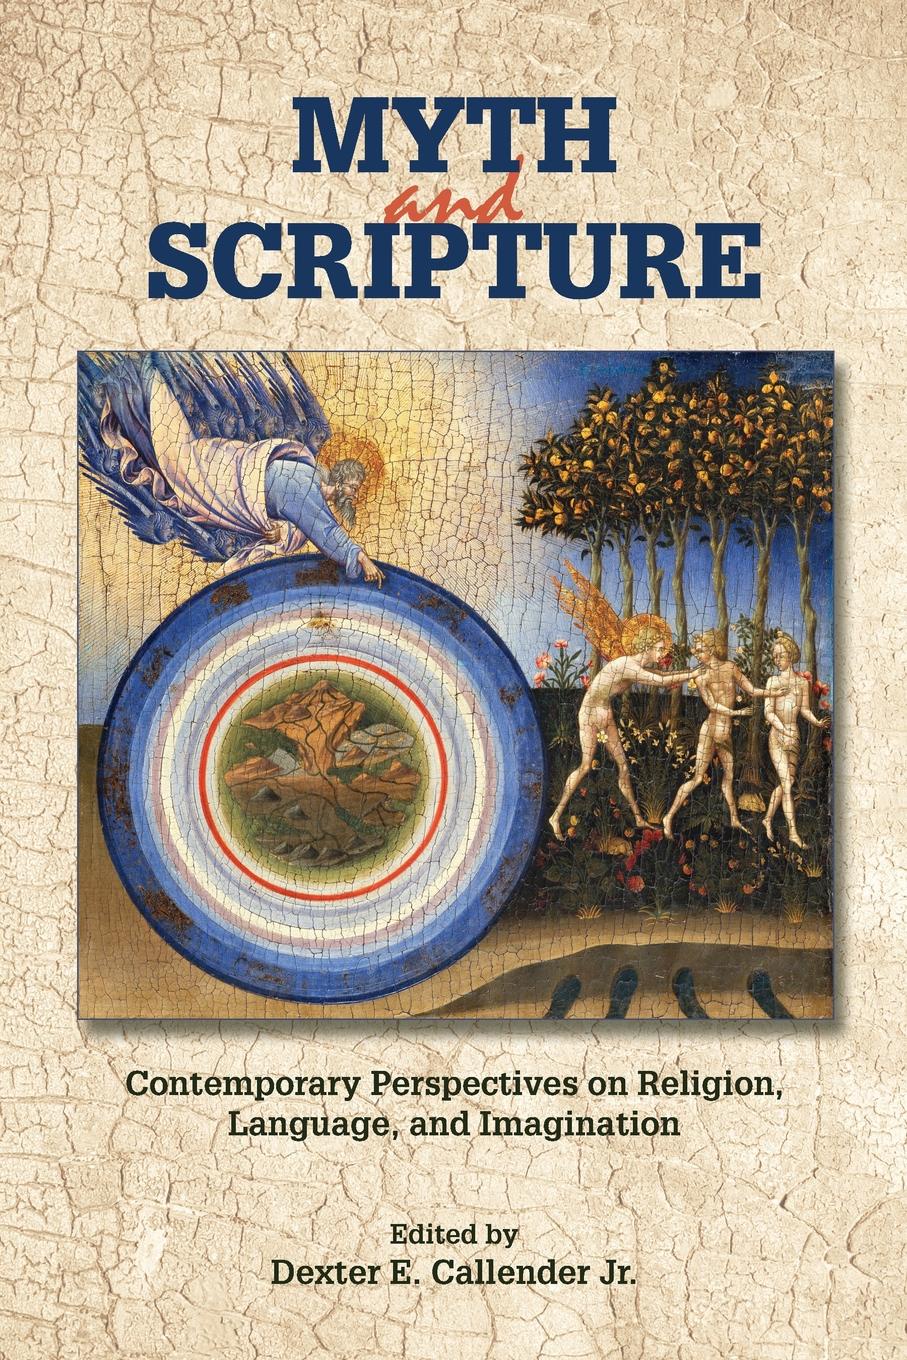 Myth and Scripture. Contemporary Perspectives on Religion, Language, and Imagination